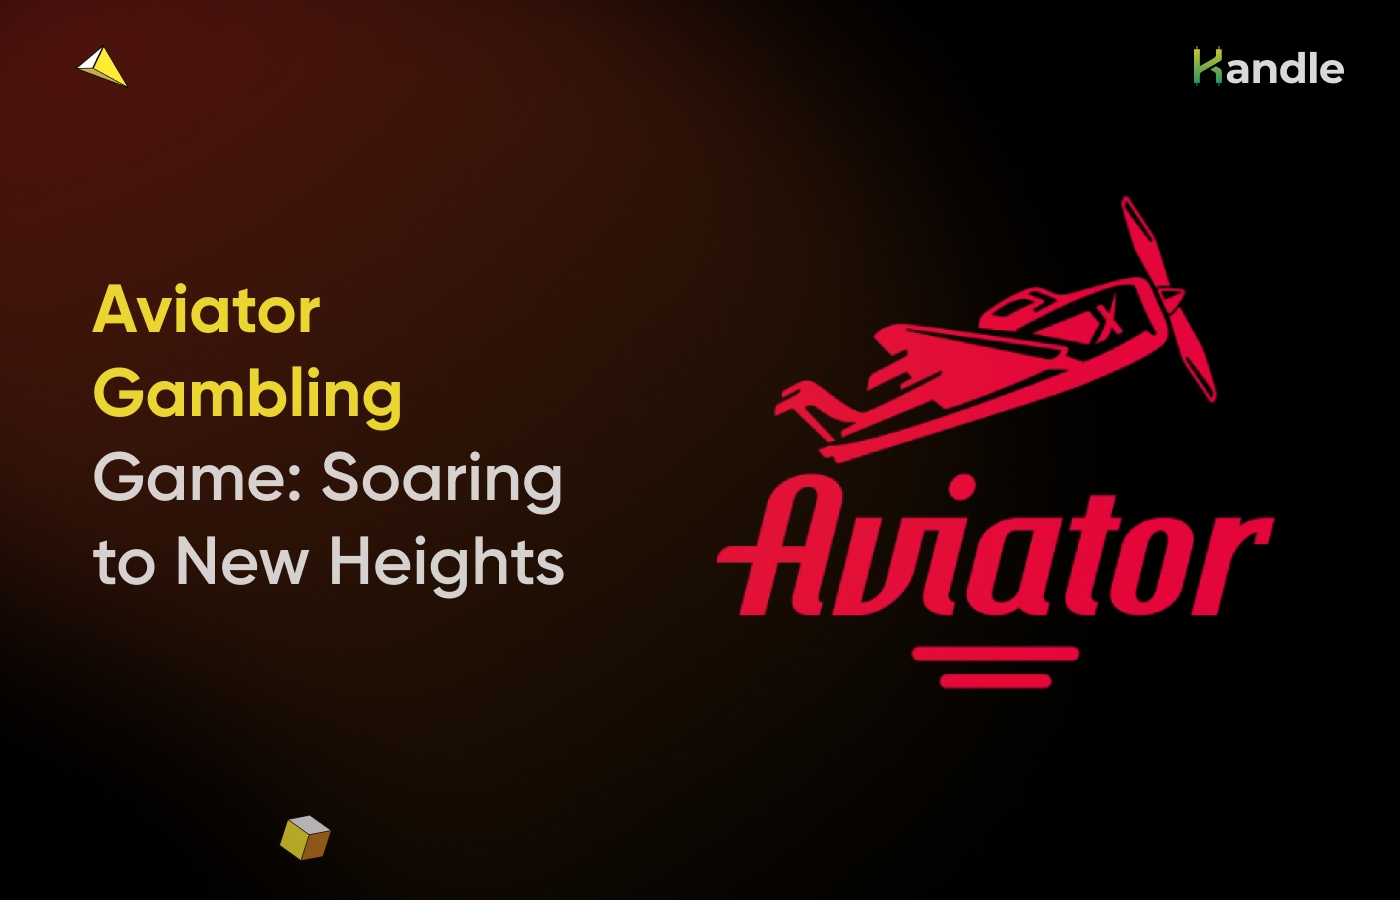 You are currently viewing Aviator Gambling Game: Soaring to New Heights